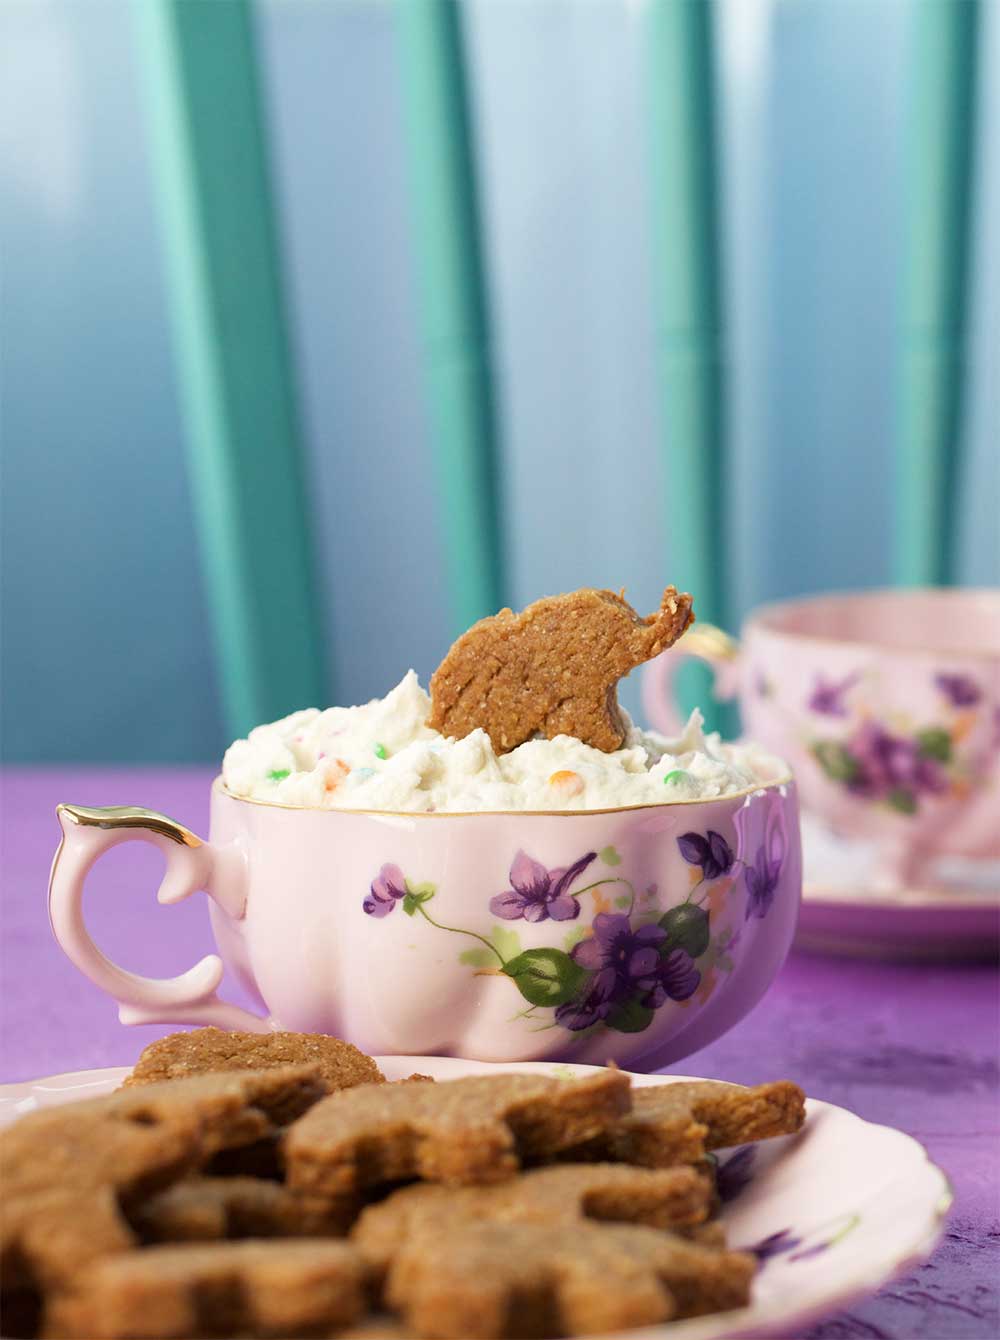 elephant shaped cookie being dipped into a funfetti frosting ina  teacup with a saucer filled with elephant cookies in the foreground